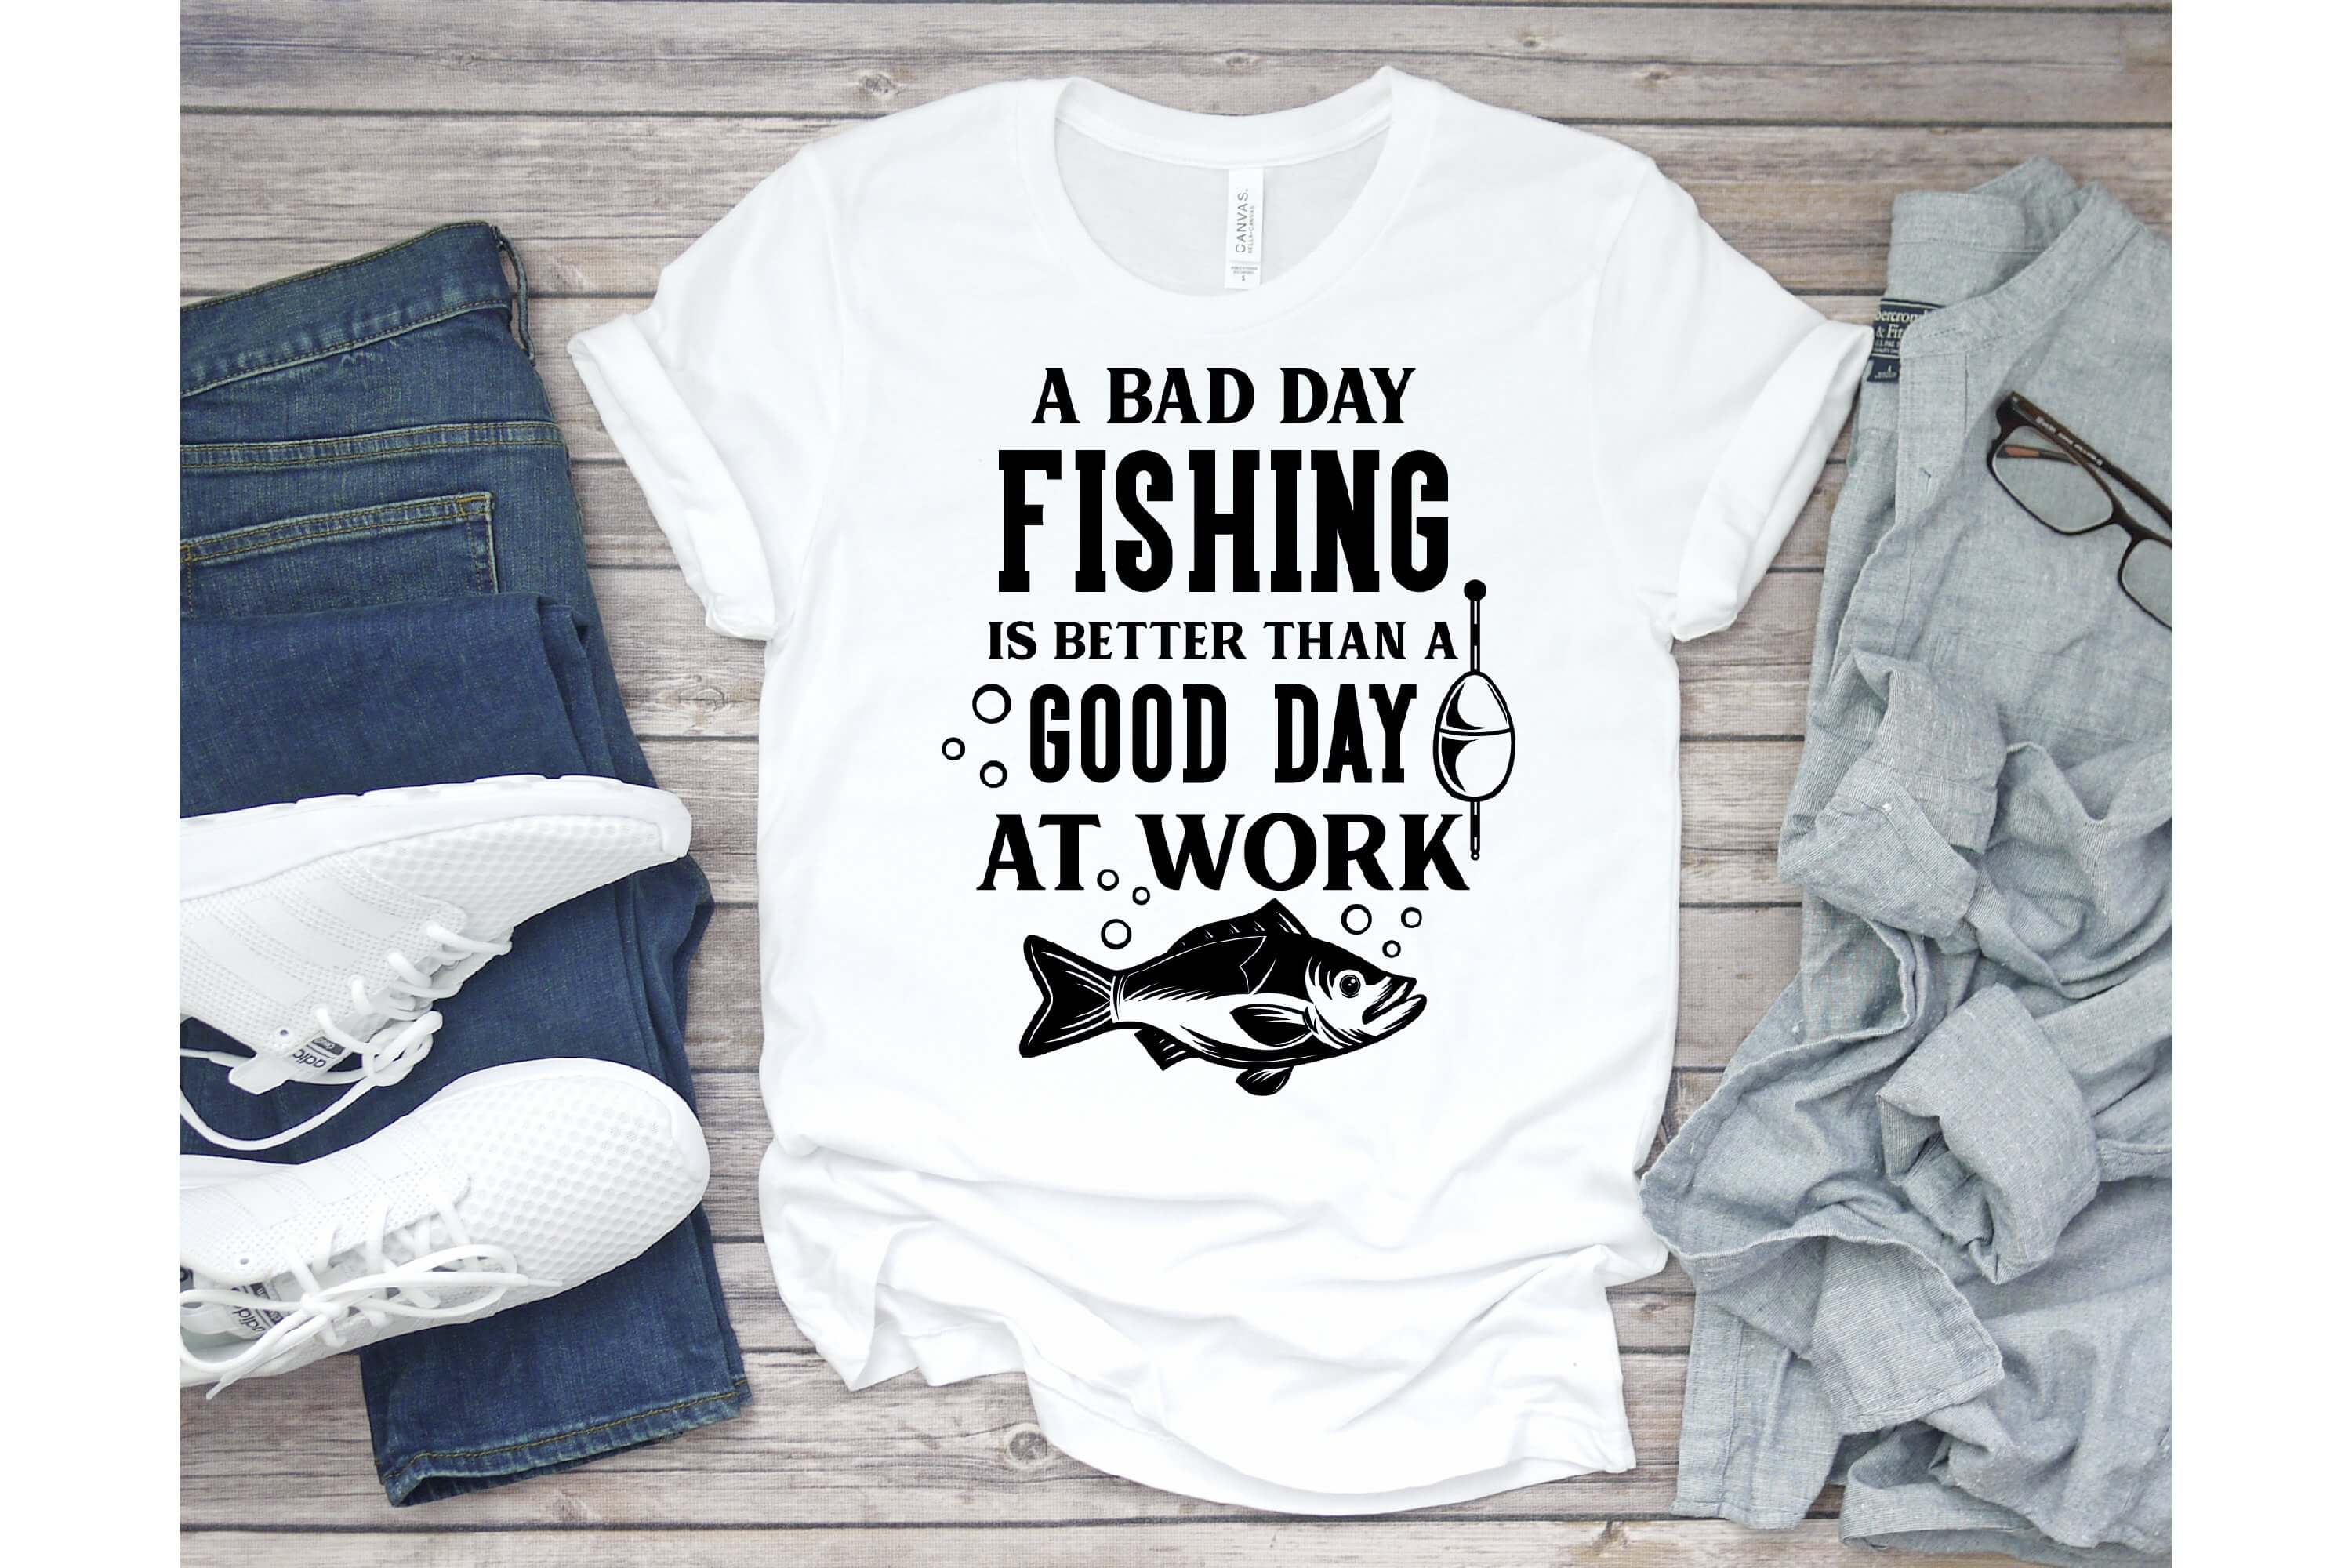 A bad day fishing is better than good day at work.